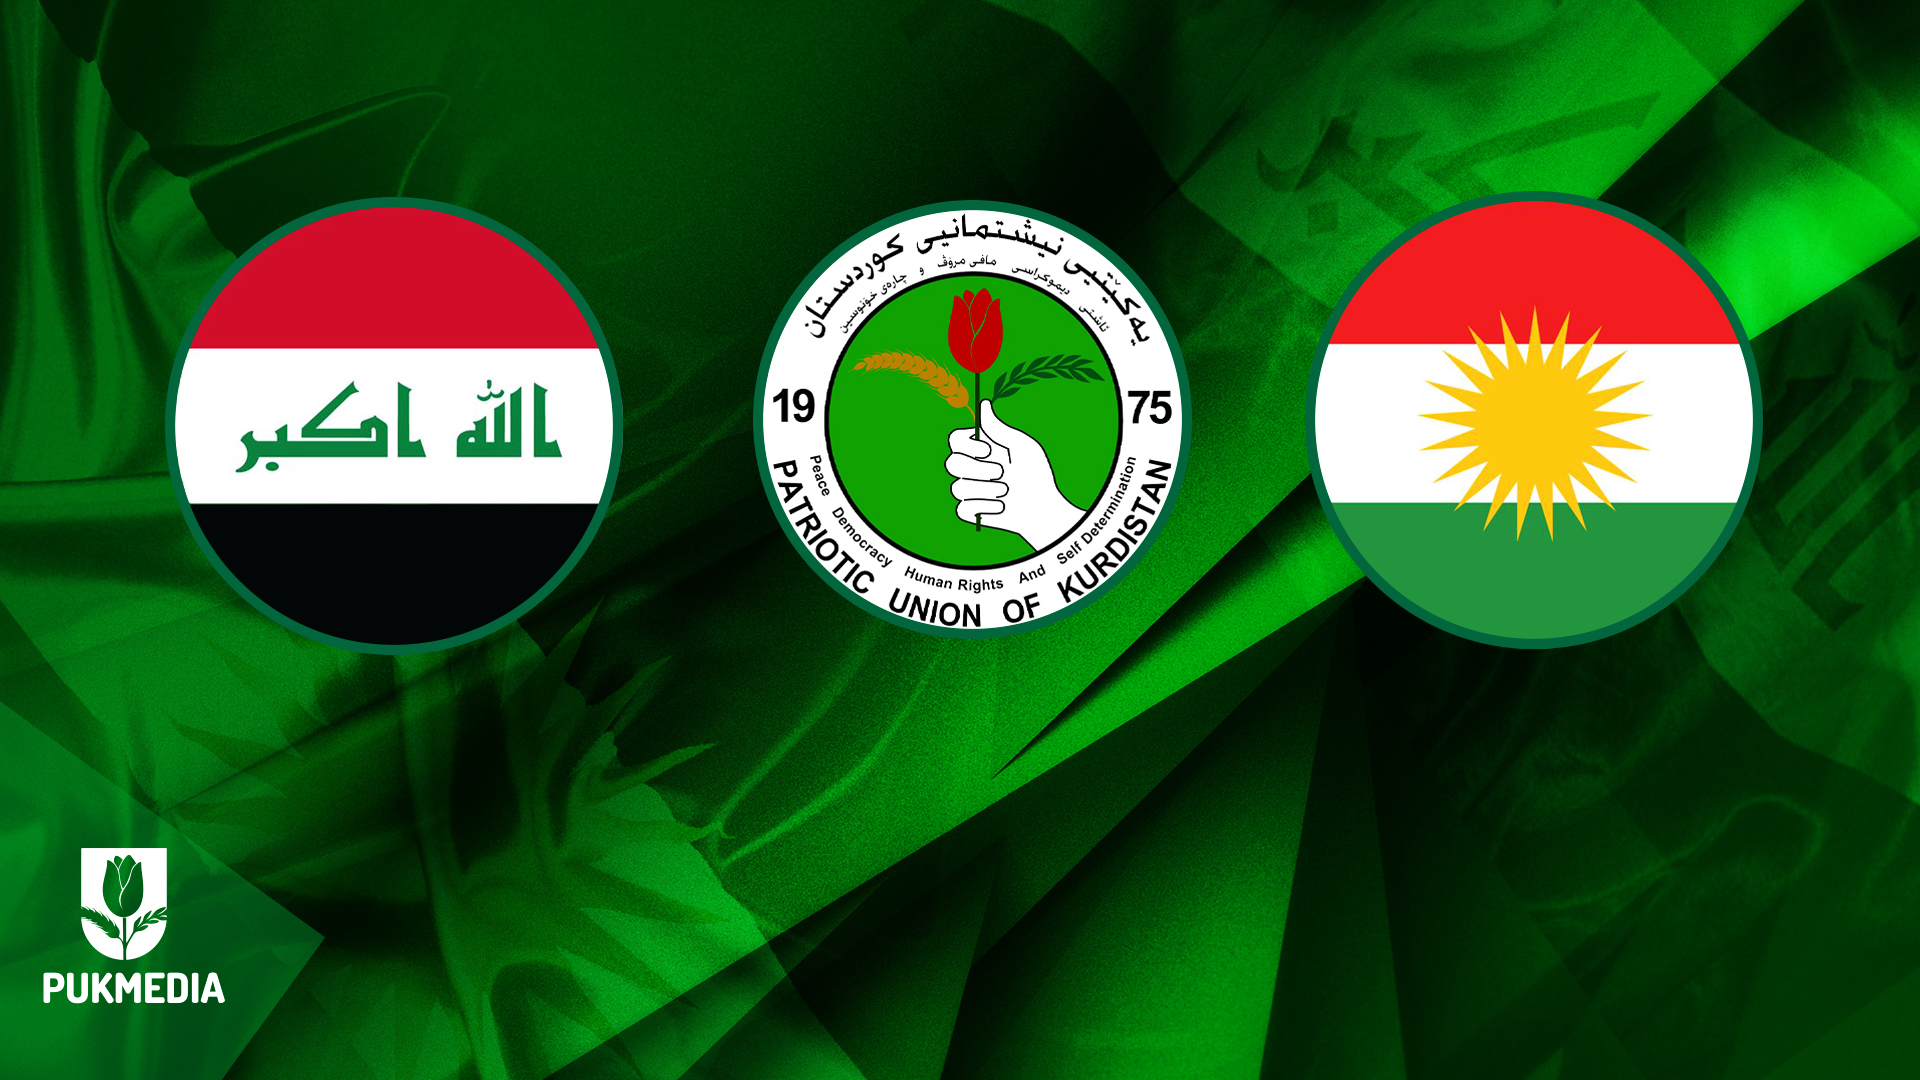  Kurdistan flag on the right, PUK flag in the middle, and Iraq's flag on the left.